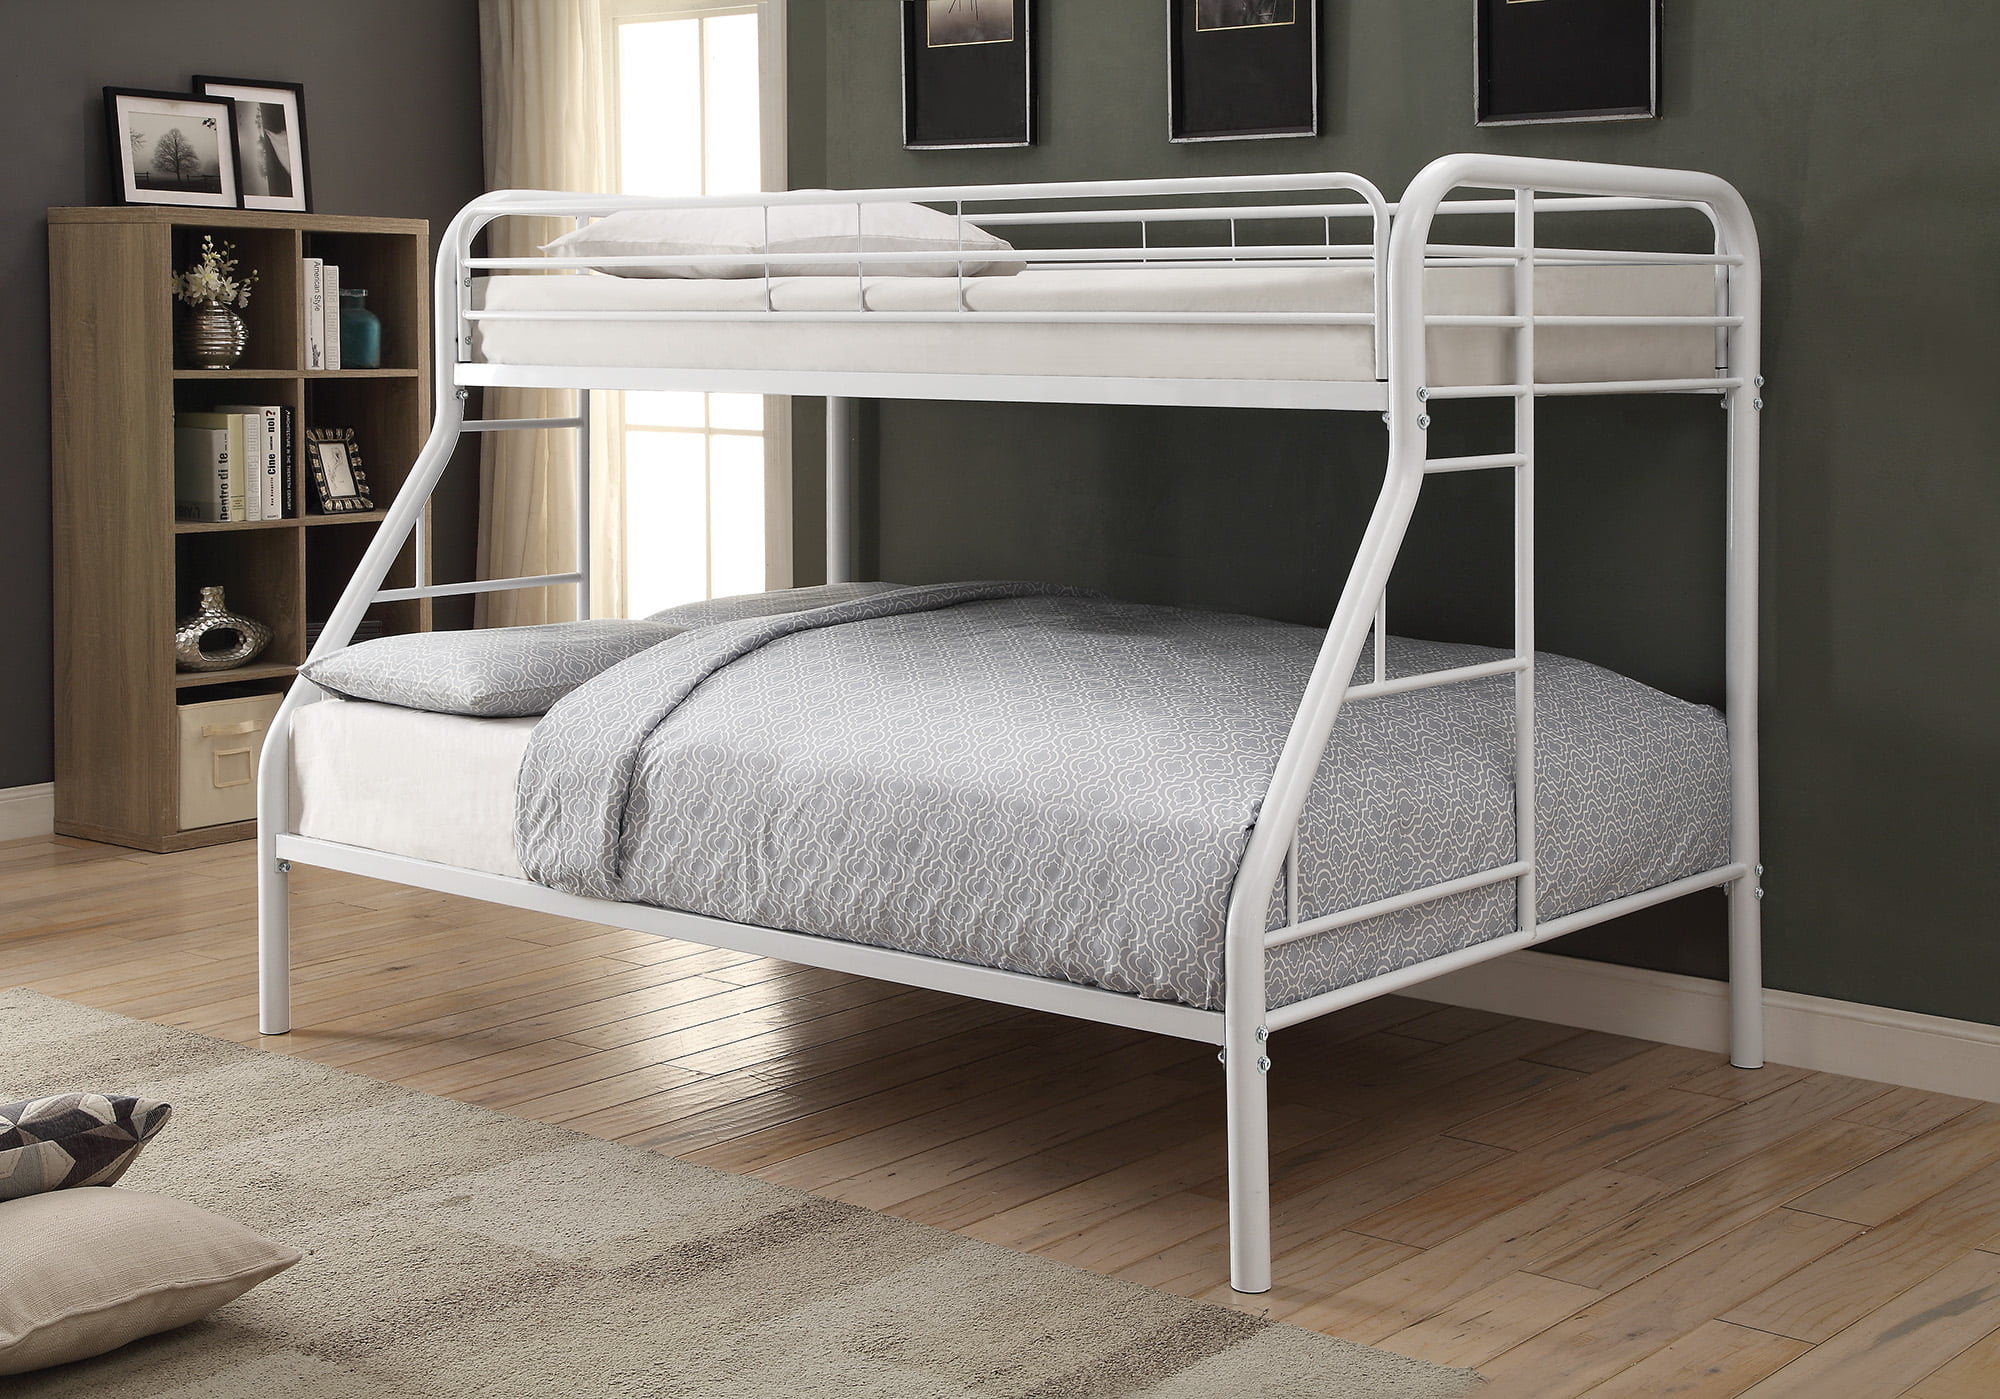 metal frame bunk beds with mattresses included